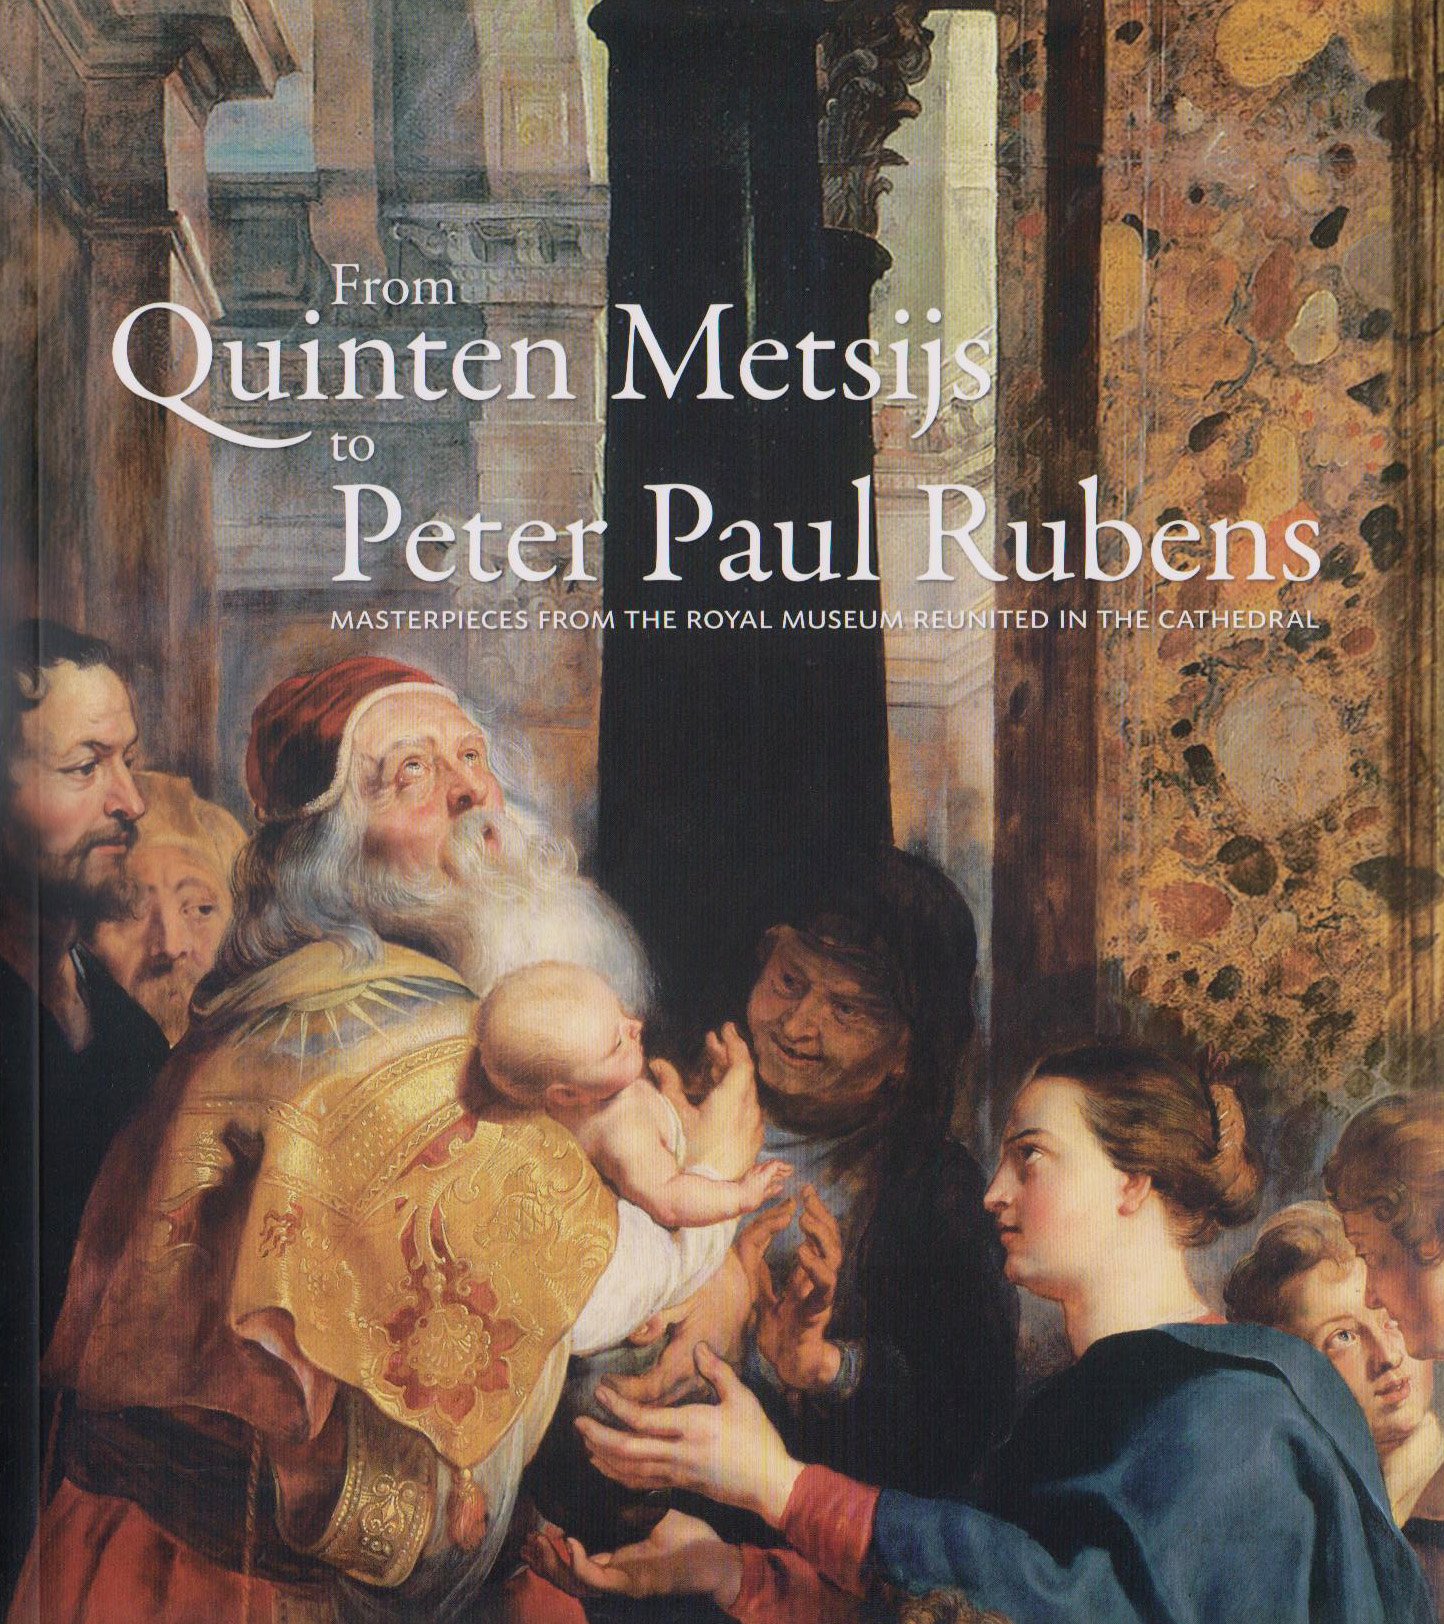 From Quinten Metsys to Peter Paul Rubens: Masterpieces from the Royal Museum Reunited in the Cathedral